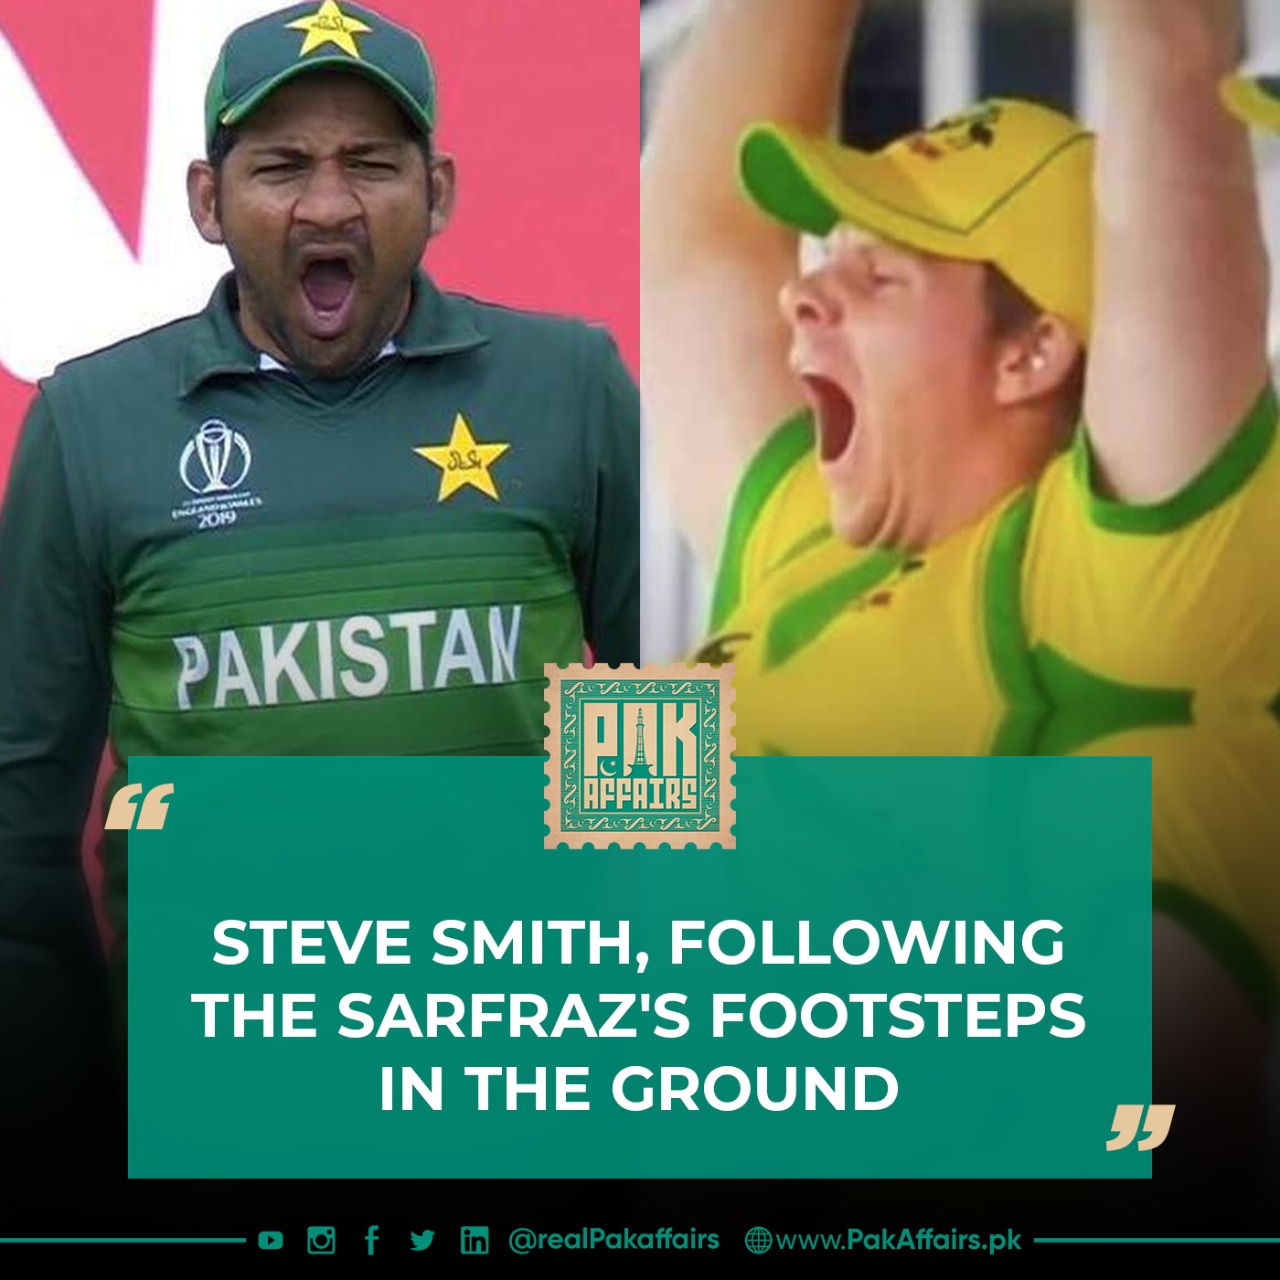 Steve Smith, following the Sarfraz's footsteps in the ground.